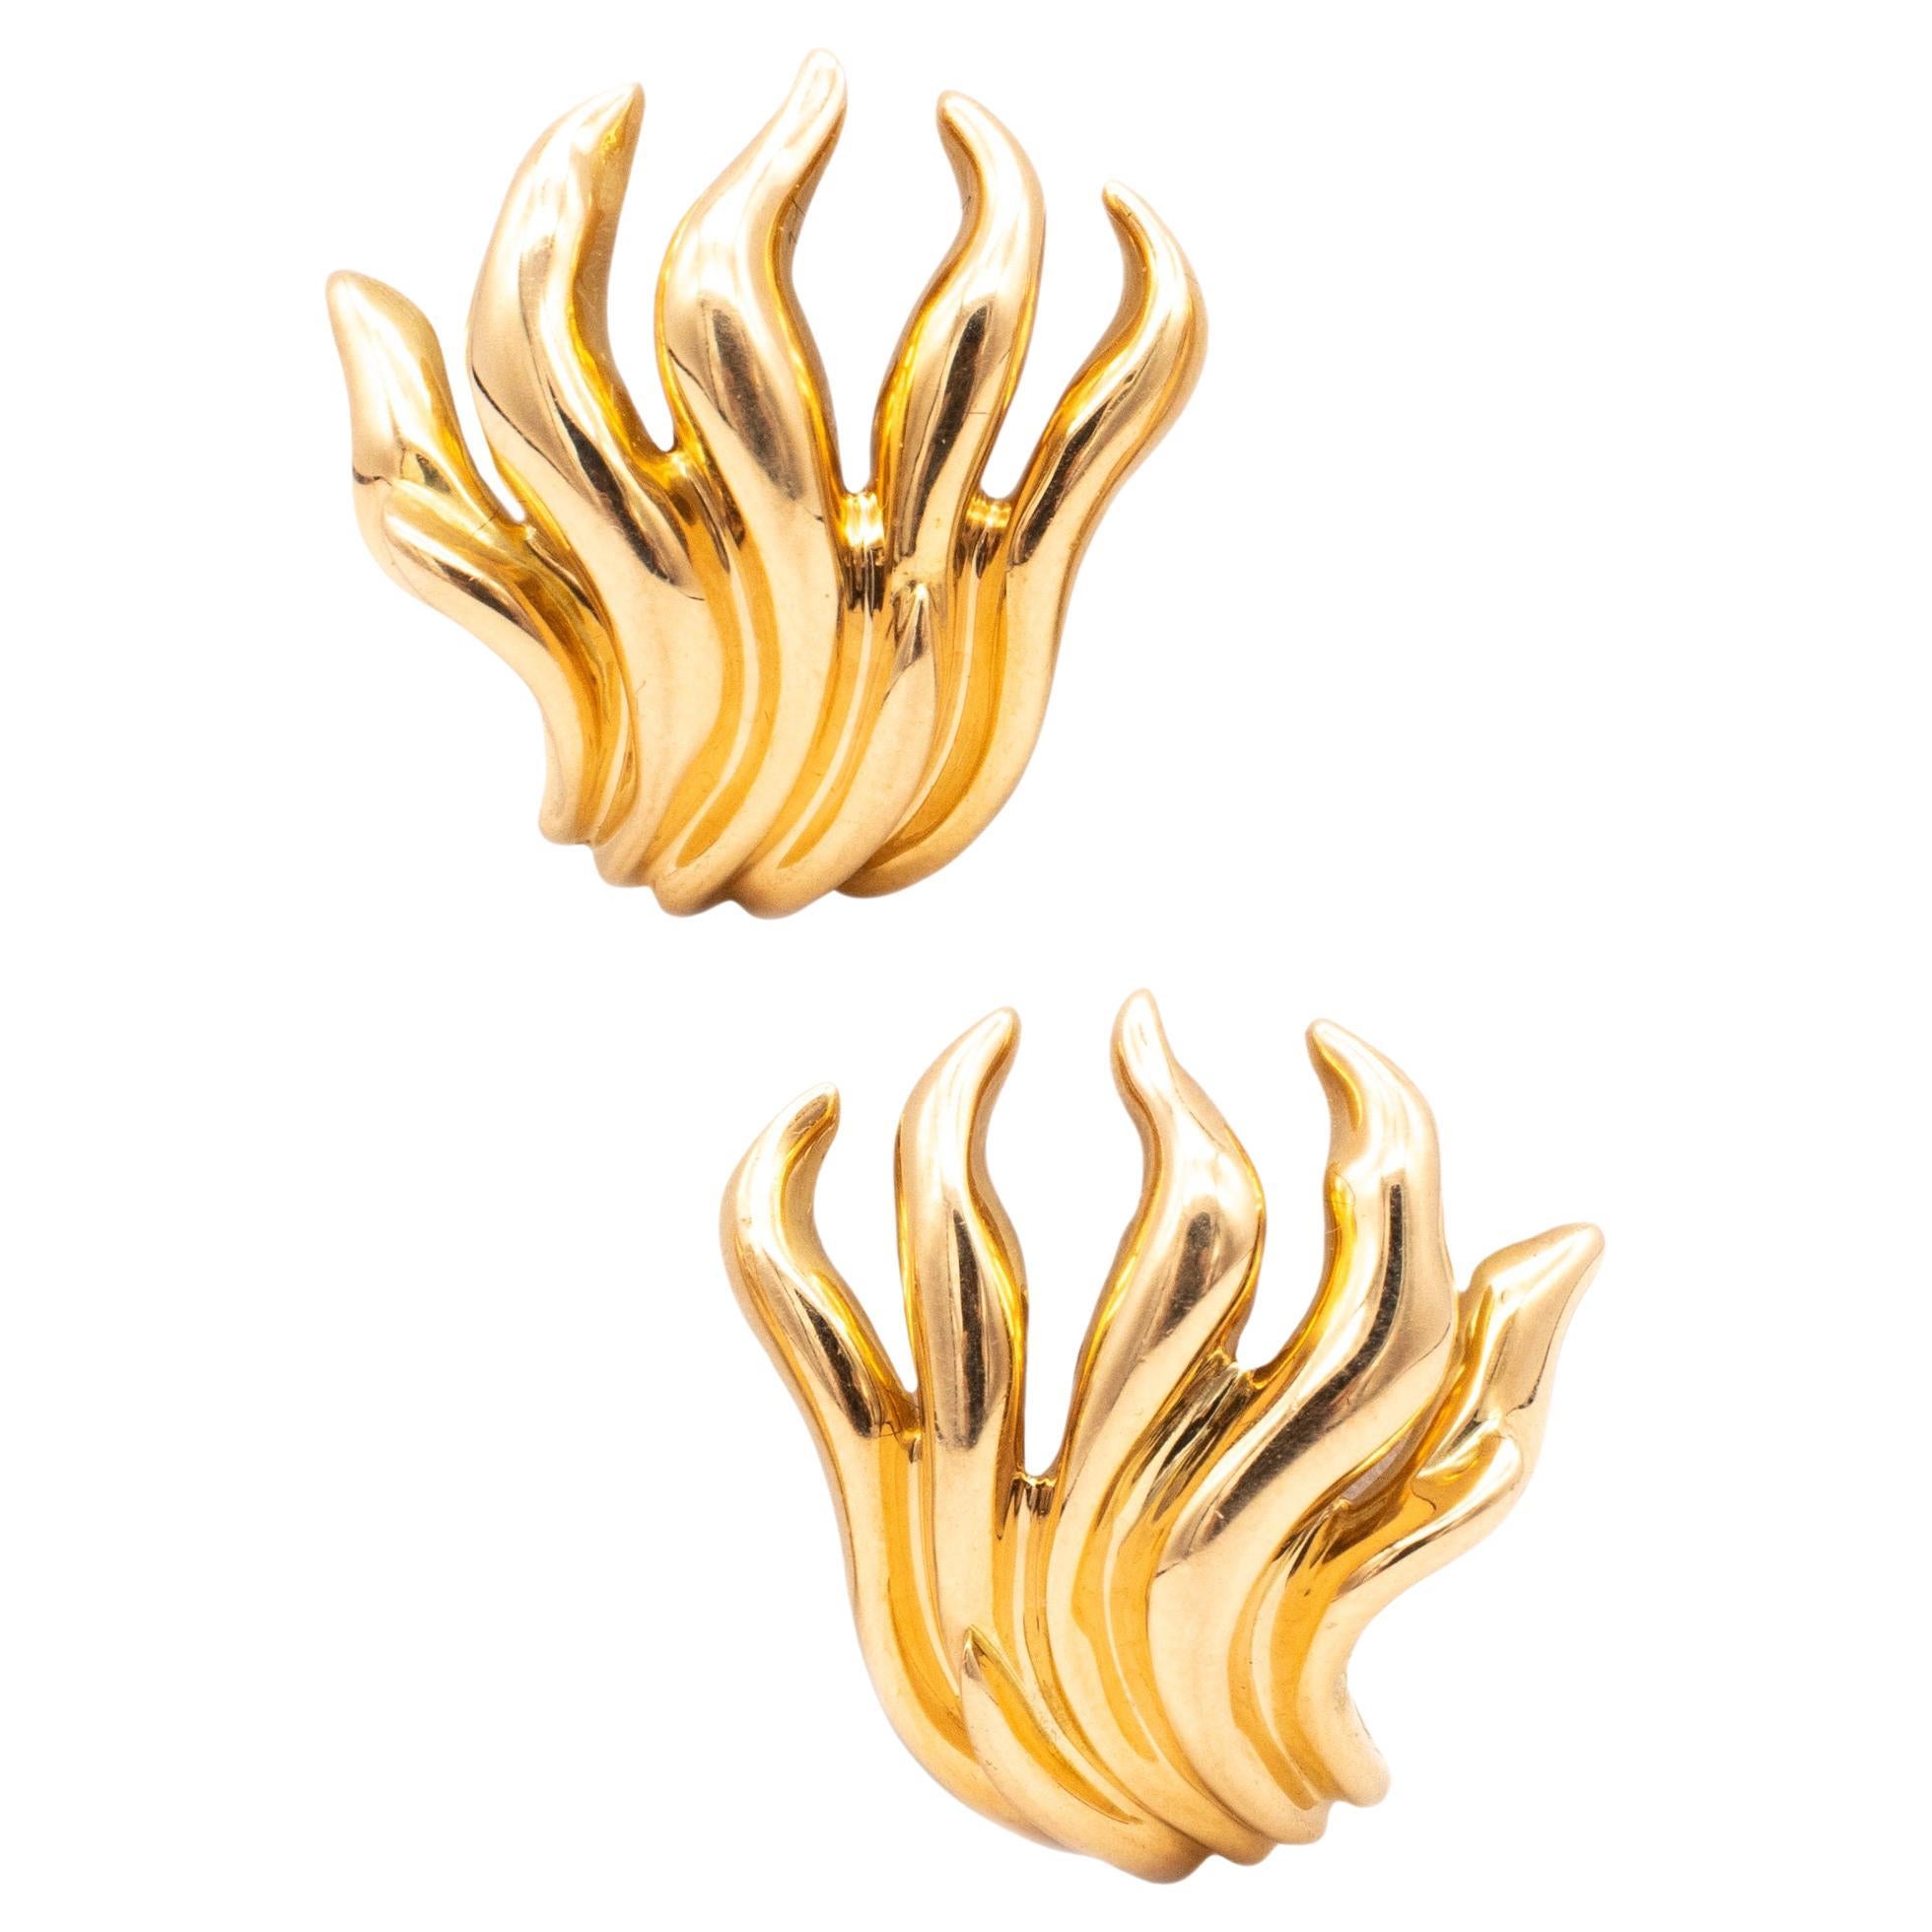 Verdura Milan Tendril Flames Sculptural Earrings in Solid 18Kt Yellow Gold For Sale